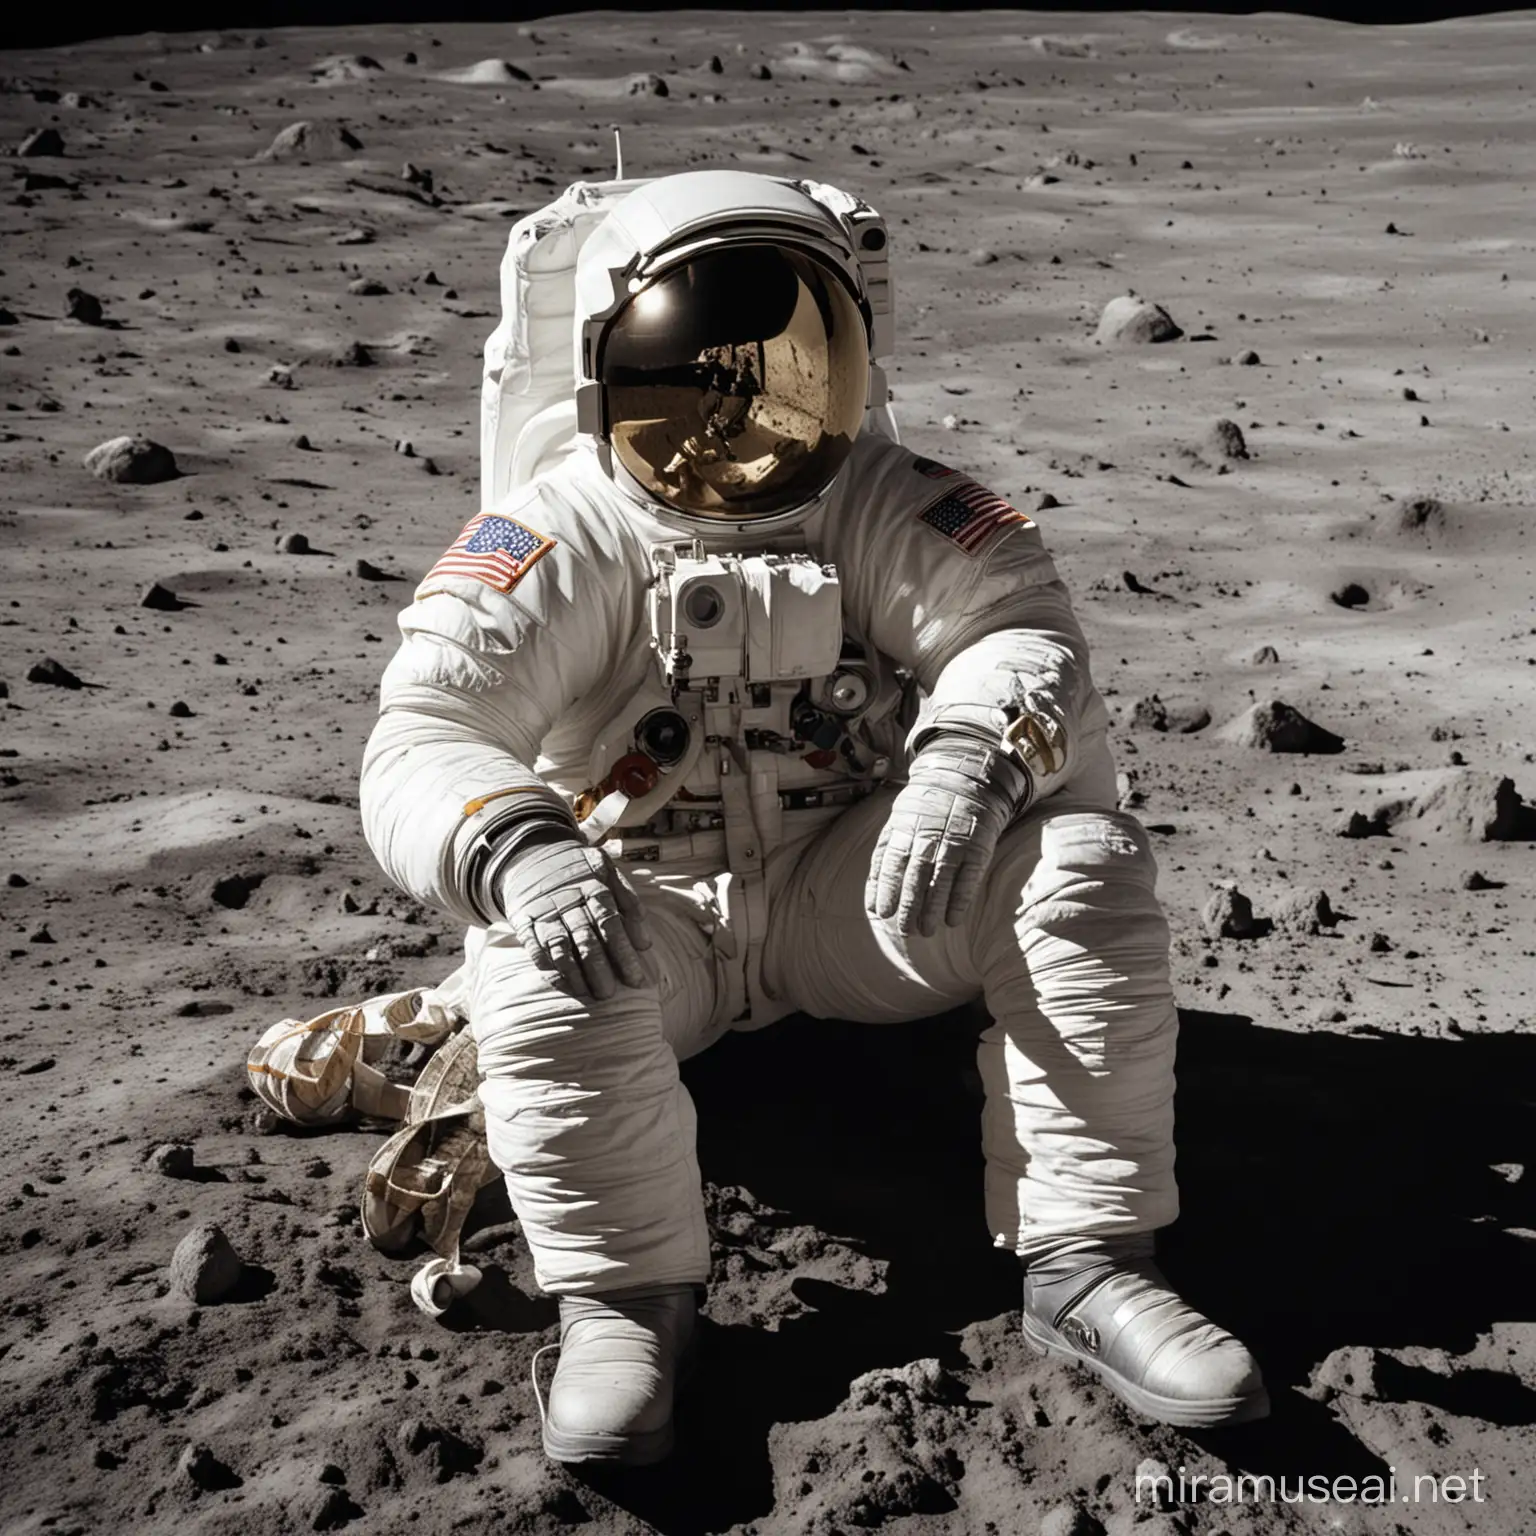 An astronaut sits on the moon in a closed spacesuit

